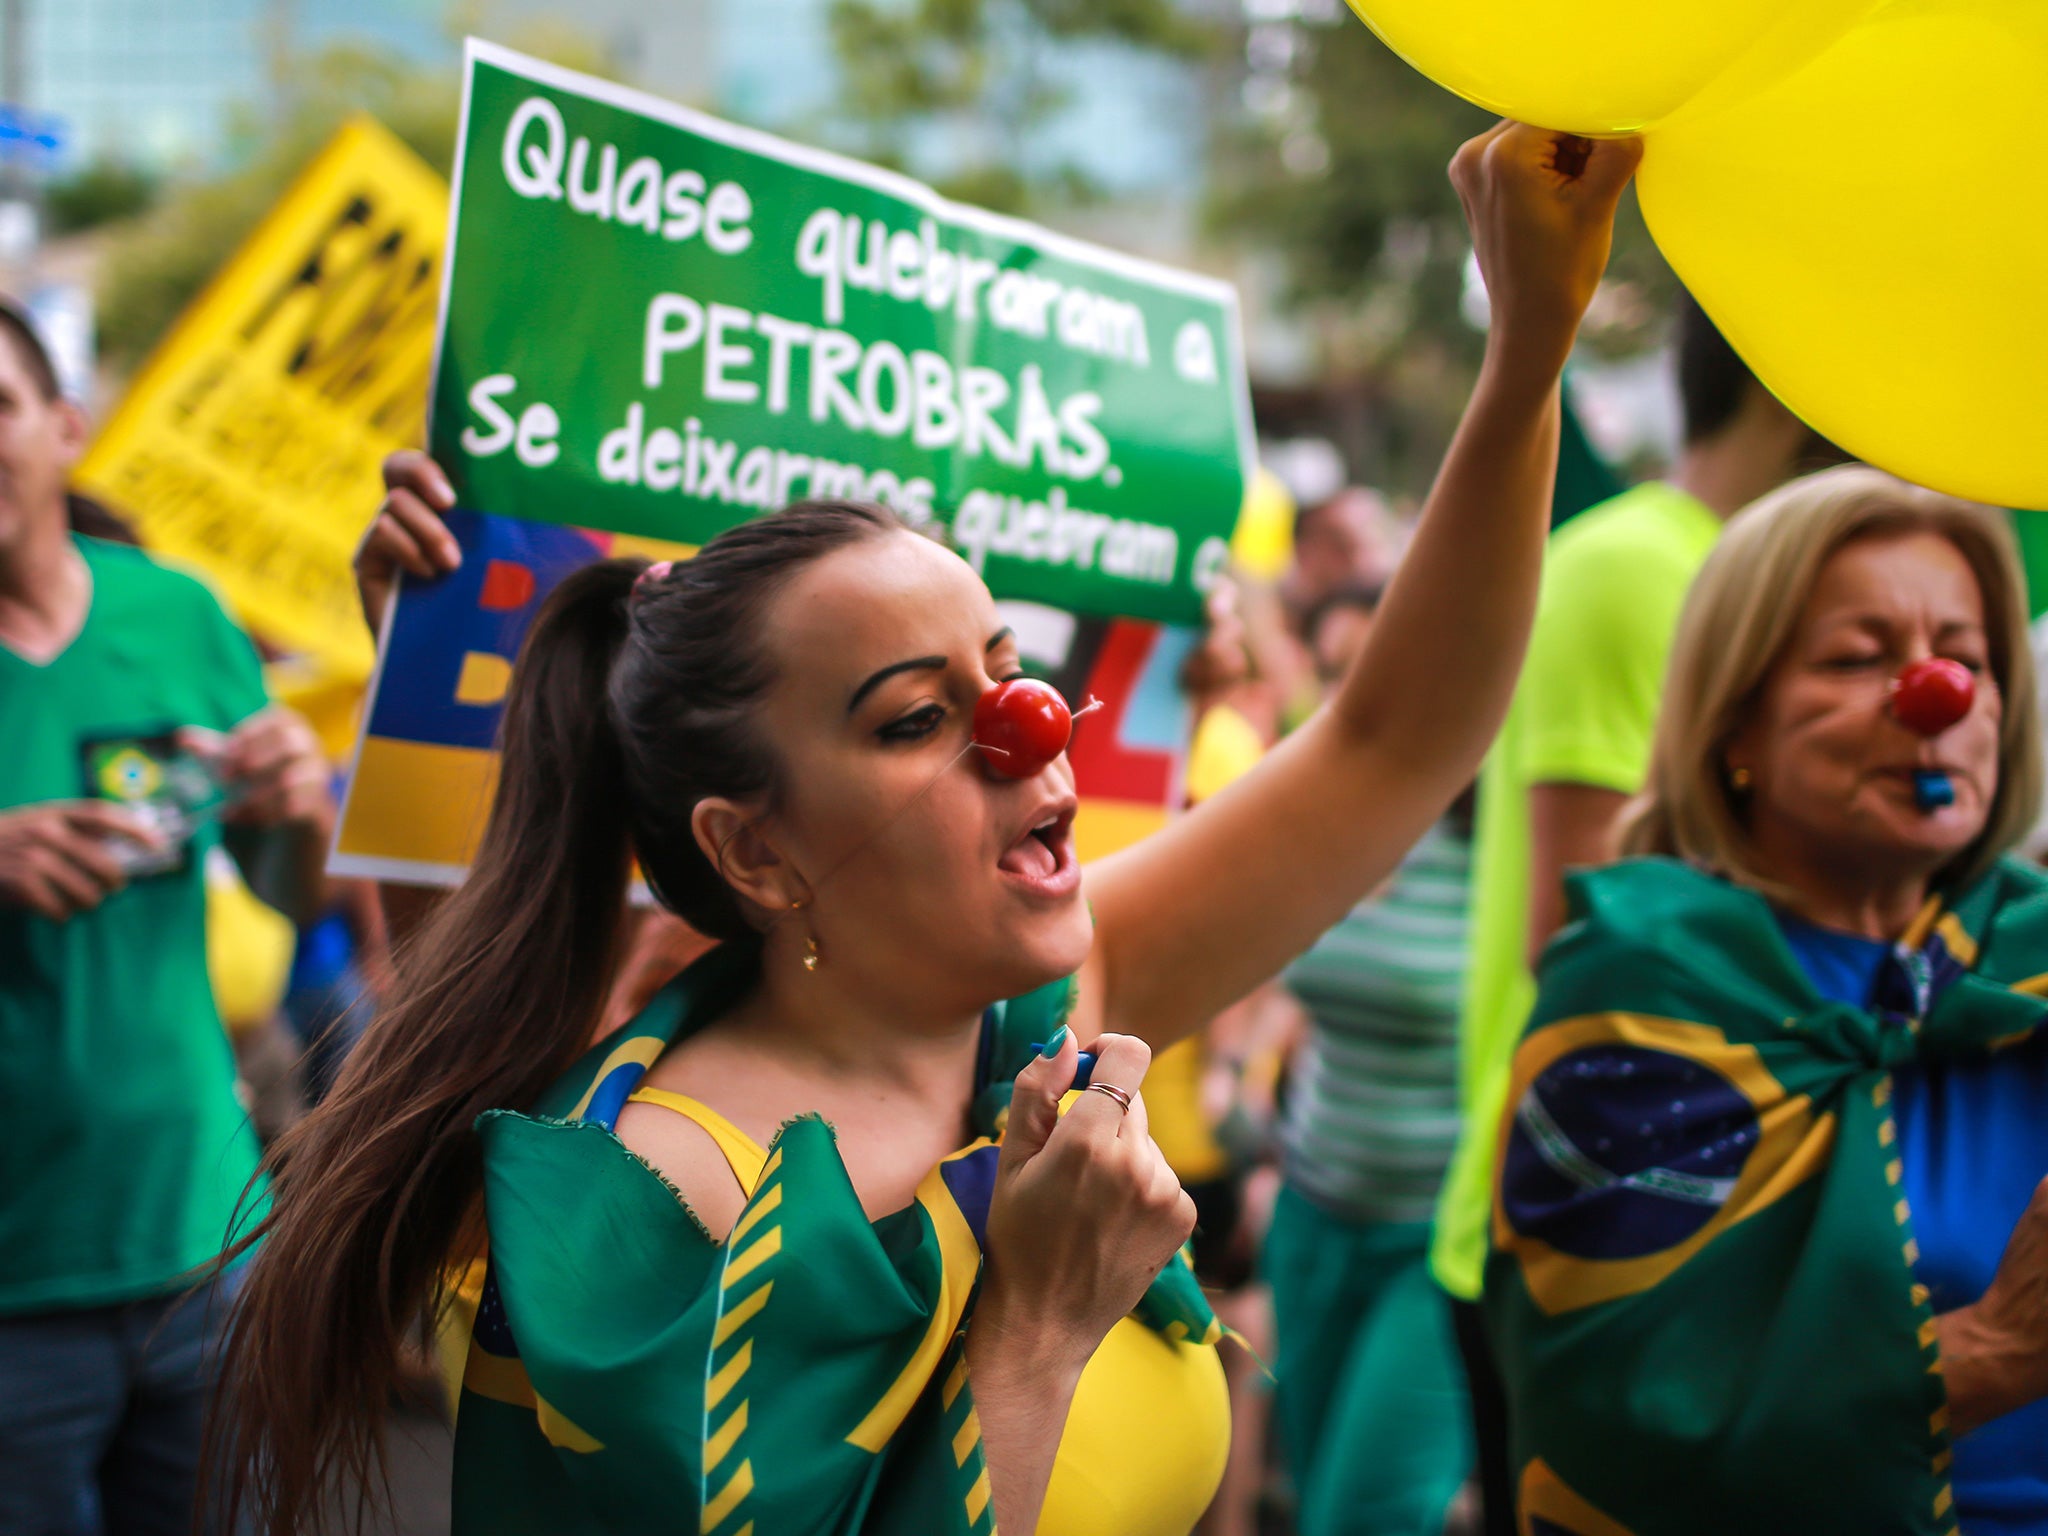 Protests against Brazil’s President Dilma Rousseff